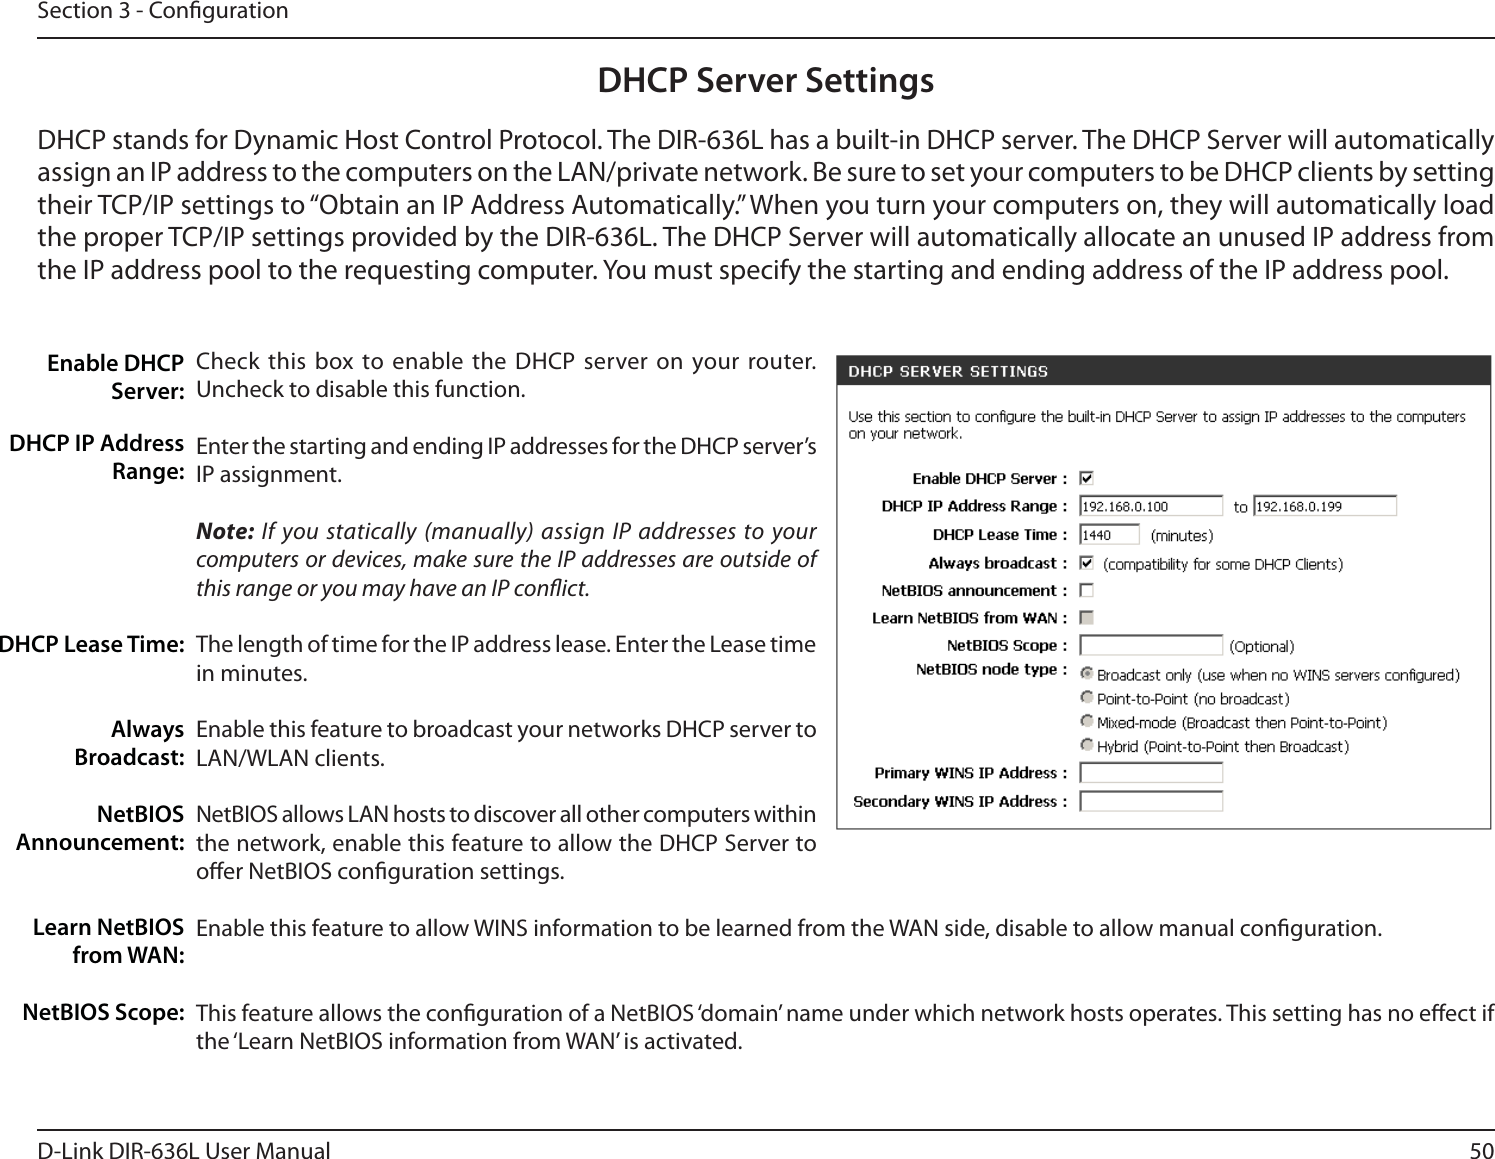 50D-Link DIR-636L User ManualSection 3 - CongurationDHCP Server SettingsDHCP stands for Dynamic Host Control Protocol. The DIR-636L has a built-in DHCP server. The DHCP Server will automatically assign an IP address to the computers on the LAN/private network. Be sure to set your computers to be DHCP clients by setting their TCP/IP settings to “Obtain an IP Address Automatically.” When you turn your computers on, they will automatically load the proper TCP/IP settings provided by the DIR-636L. The DHCP Server will automatically allocate an unused IP address from the IP address pool to the requesting computer. You must specify the starting and ending address of the IP address pool.Check this box to enable the DHCP server on your router. Uncheck to disable this function.Enter the starting and ending IP addresses for the DHCP server’s IP assignment.Note: If you statically (manually) assign IP addresses to your computers or devices, make sure the IP addresses are outside of this range or you may have an IP conict. The length of time for the IP address lease. Enter the Lease time in minutes.Enable this feature to broadcast your networks DHCP server to LAN/WLAN clients.NetBIOS allows LAN hosts to discover all other computers within the network, enable this feature to allow the DHCP Server to oer NetBIOS conguration settings.Enable this feature to allow WINS information to be learned from the WAN side, disable to allow manual conguration.This feature allows the conguration of a NetBIOS ‘domain’ name under which network hosts operates. This setting has no eect if the ‘Learn NetBIOS information from WAN’ is activated.Enable DHCP Server:DHCP IP Address Range:DHCP Lease Time:Always Broadcast:NetBIOS Announcement:Learn NetBIOS from WAN:NetBIOS Scope: